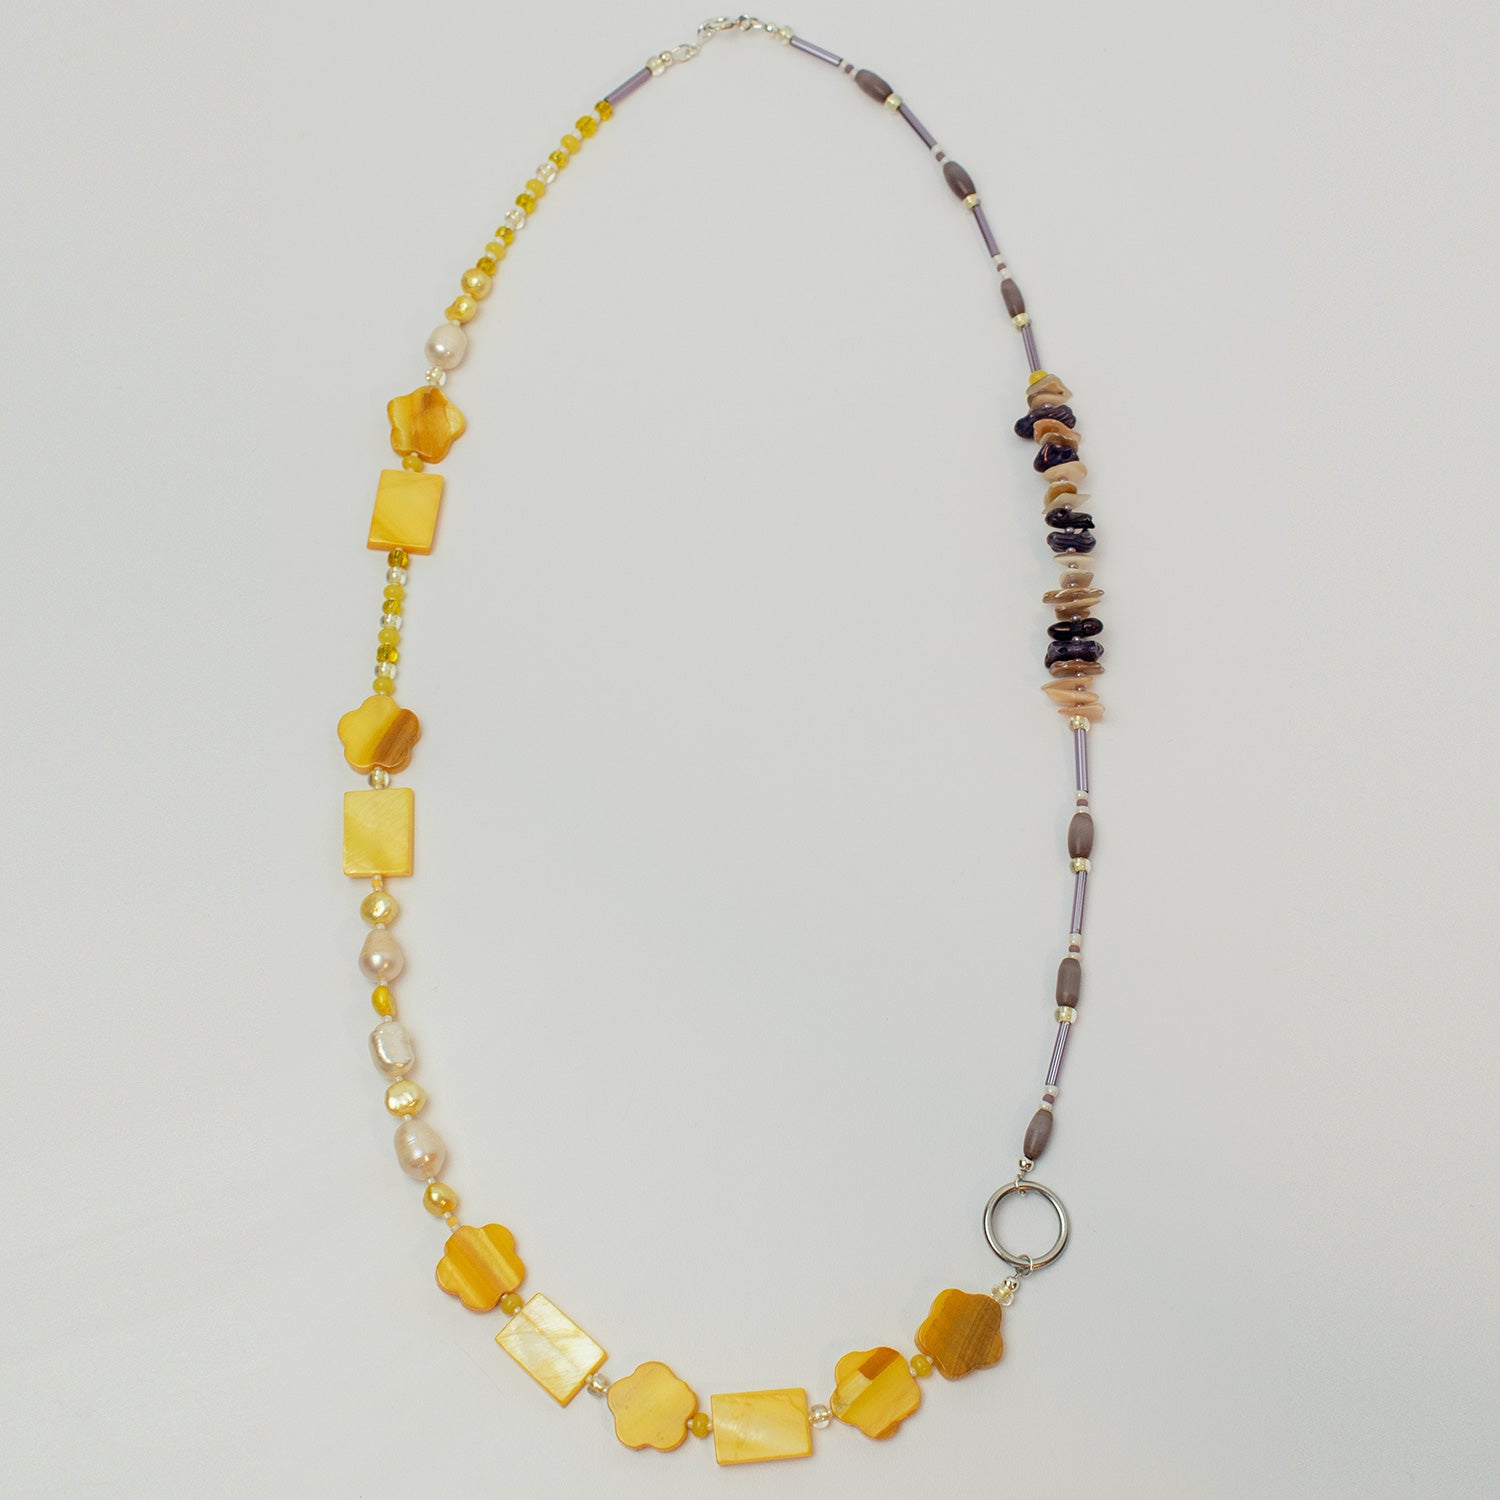 Taormina Yellow & Mauve Long Mother of Pearl Shell Necklace